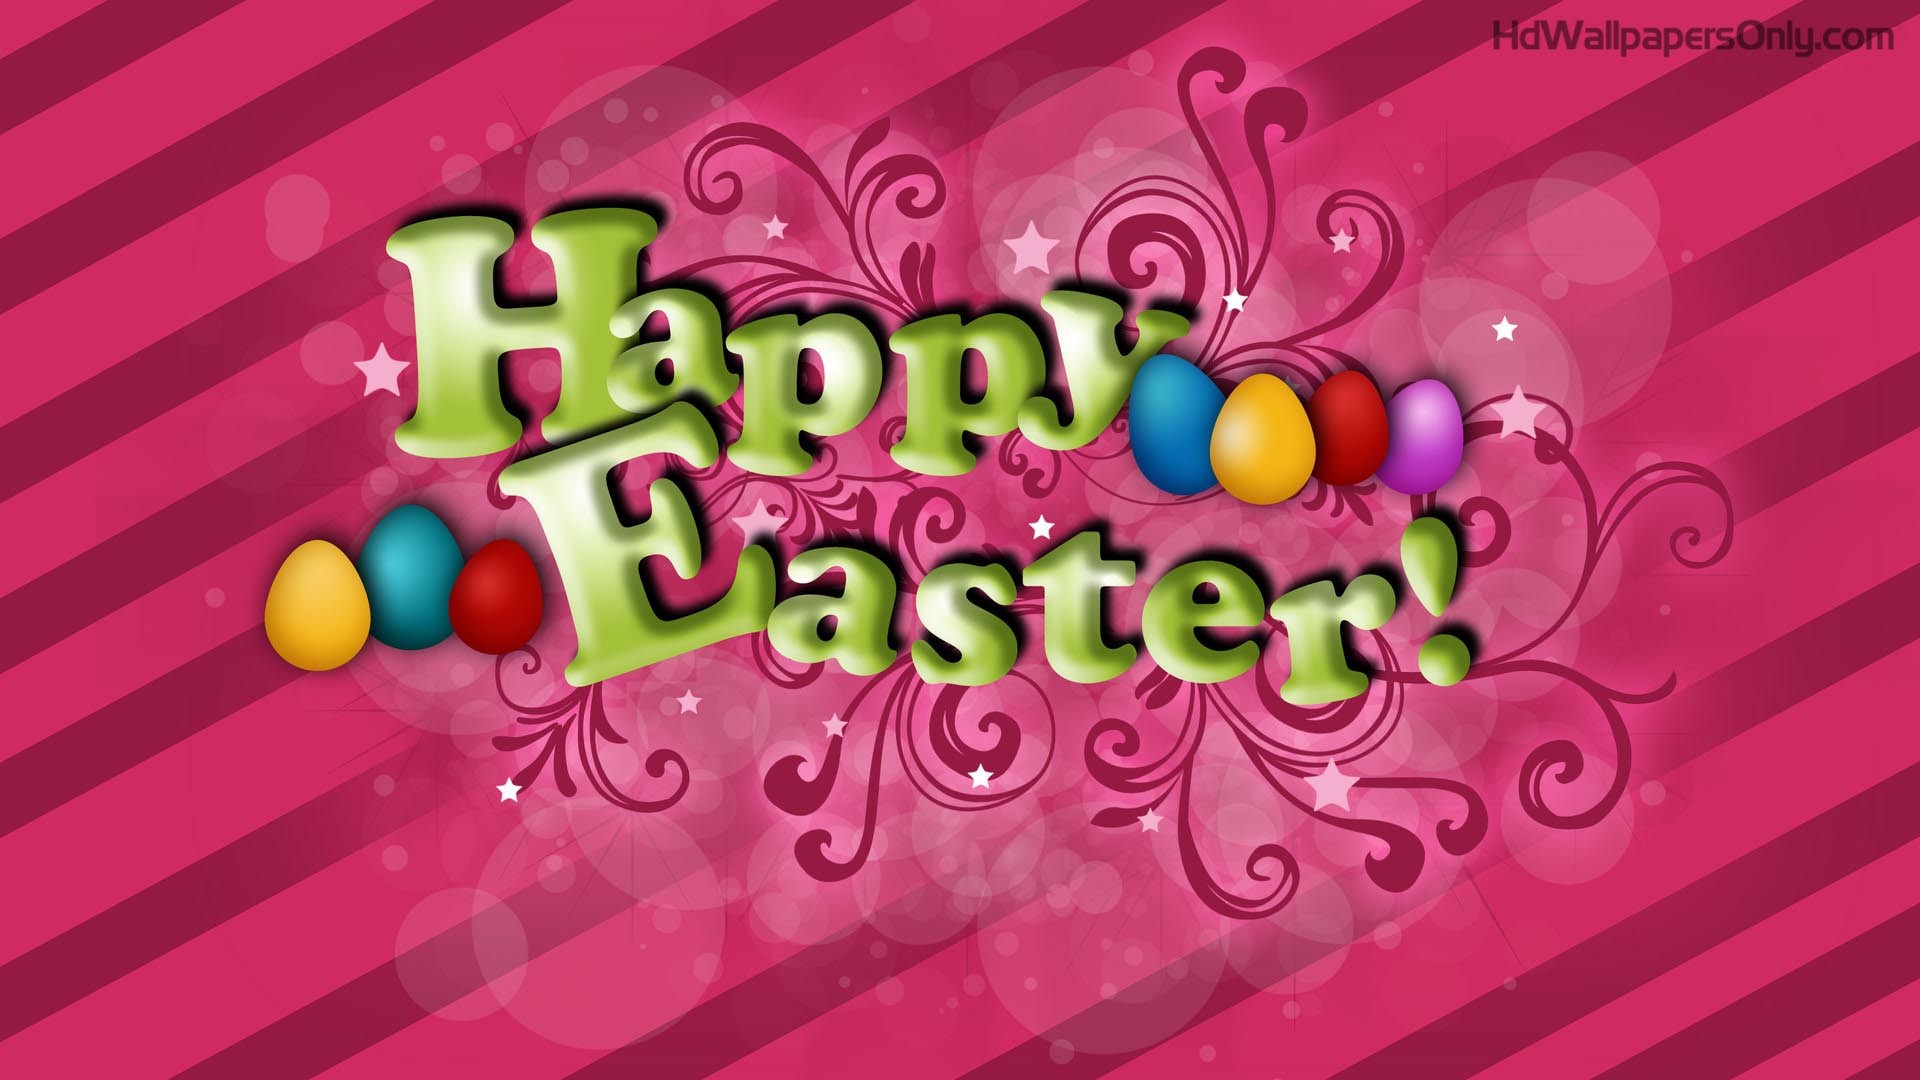 Free Easter Wallpapers HD QualityHD Wallpapers Only